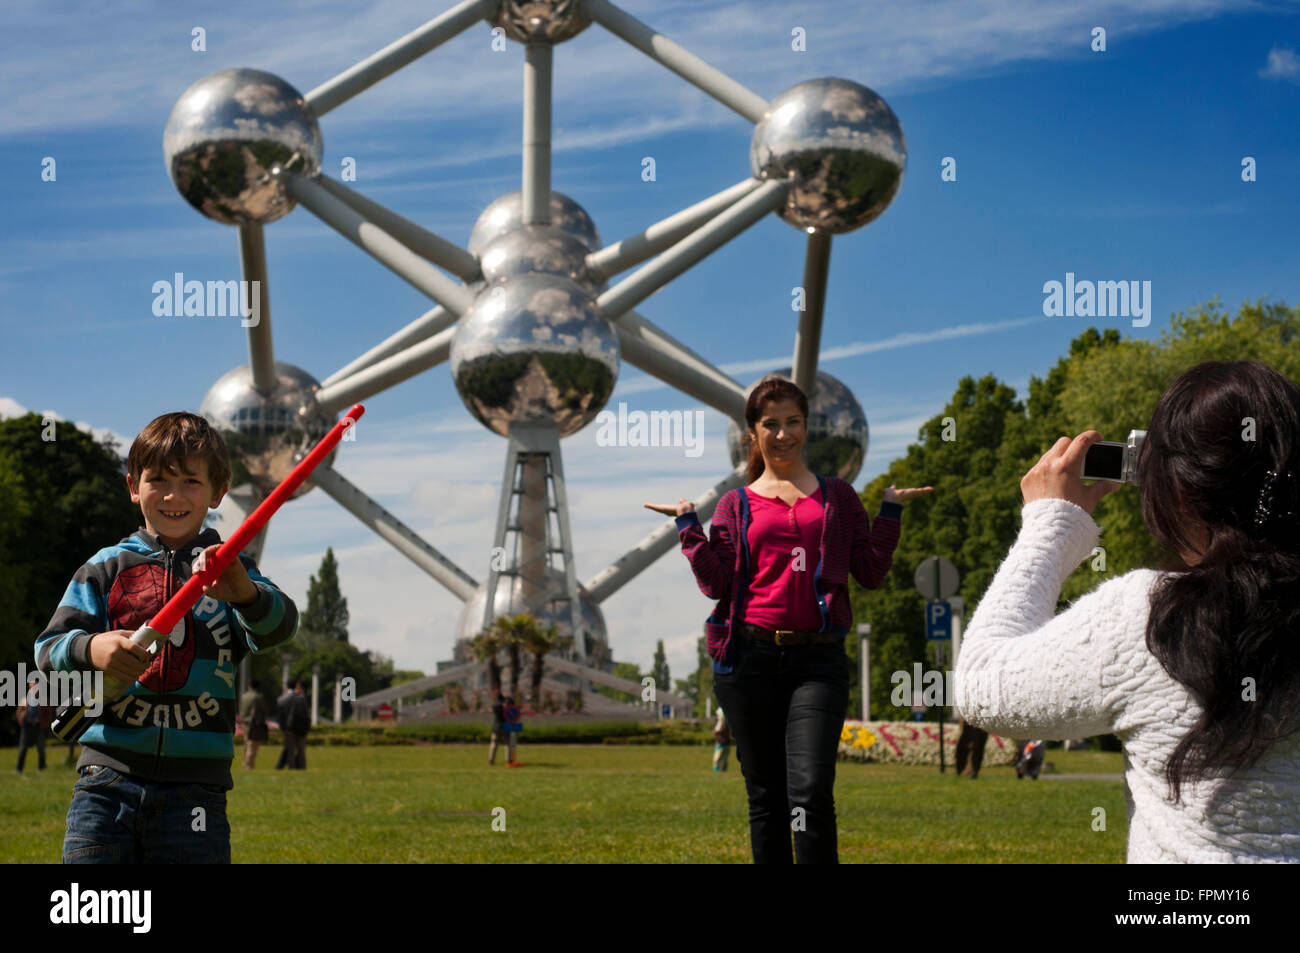 The Atomium monument designed by André Waterkeyn, Brussels, Belgium, Europe. The Atomium, with its 102 meters high and 2400 tons Stock Photo